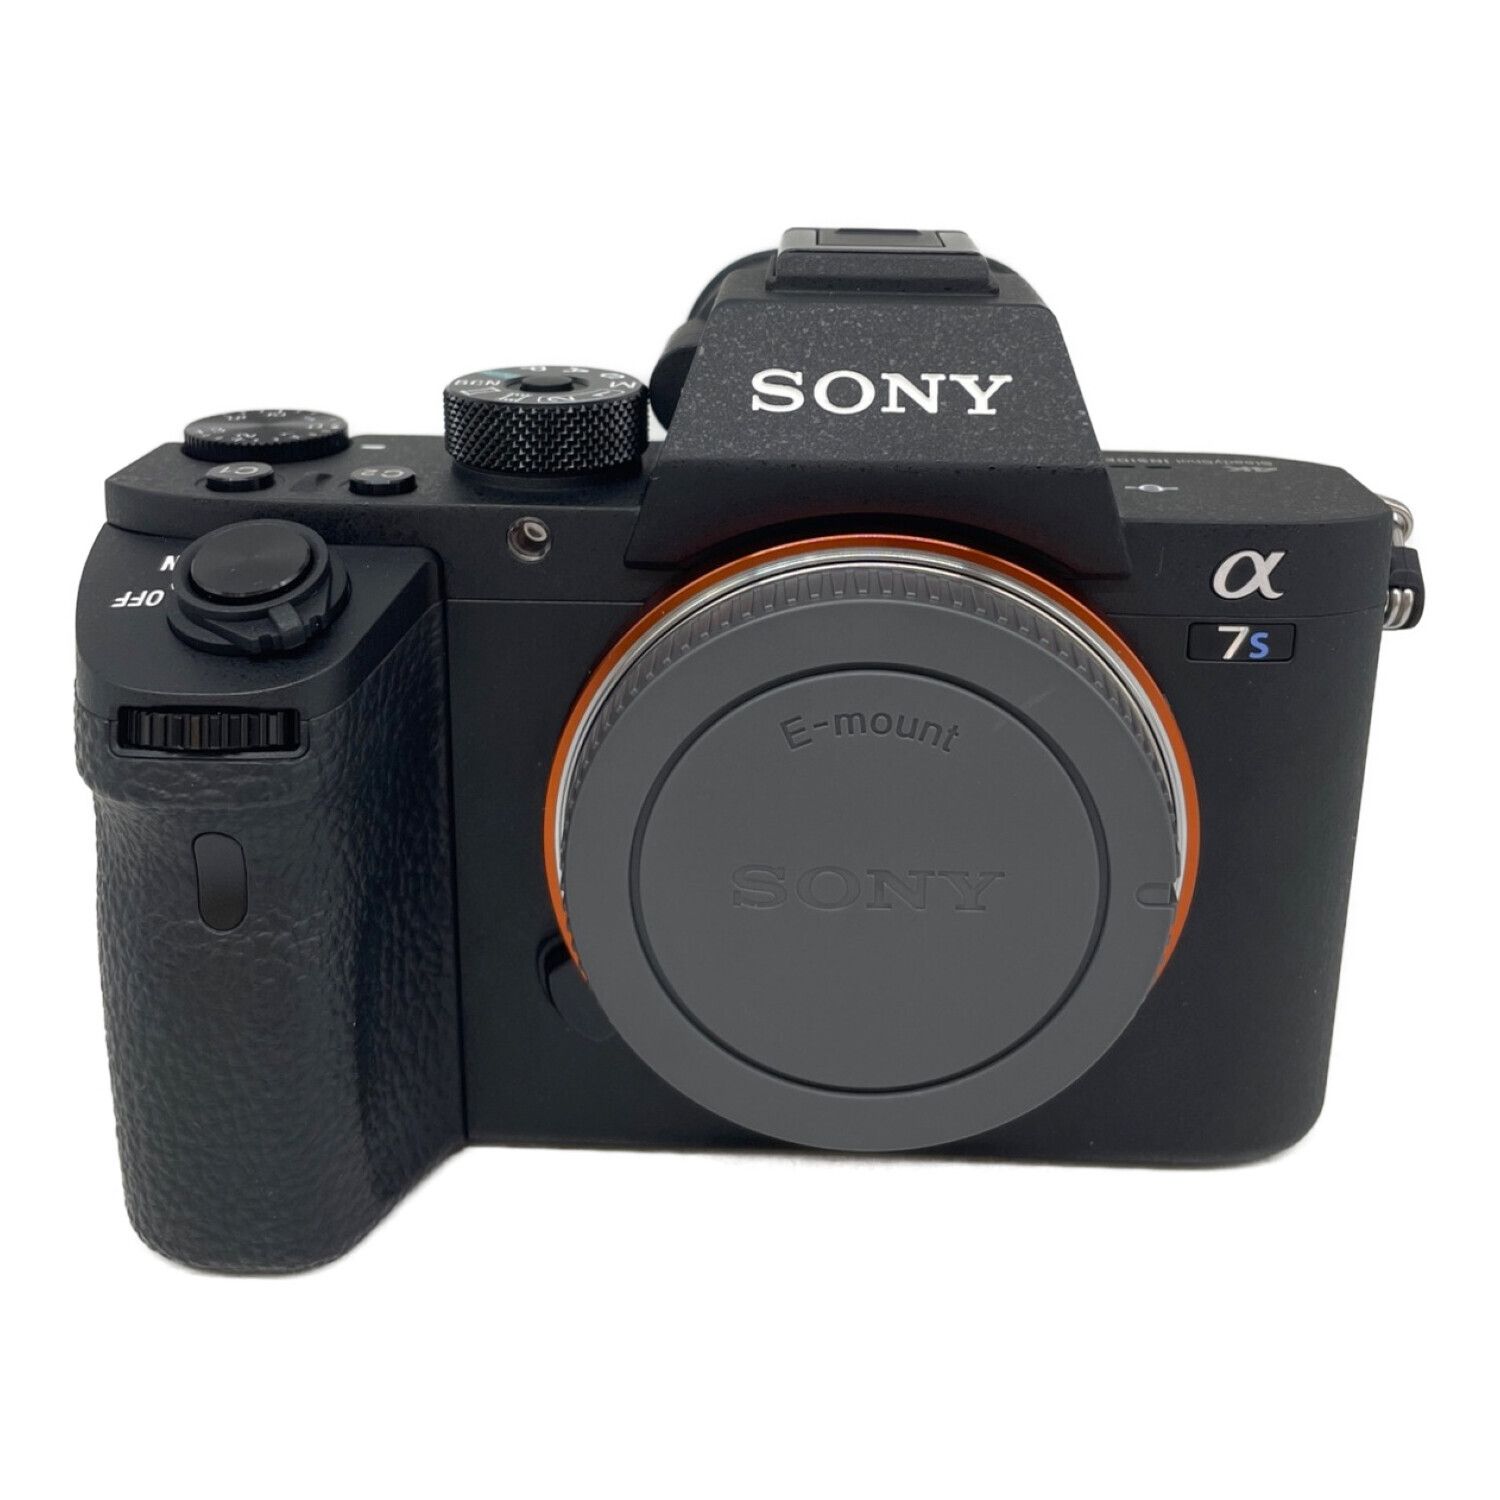 SONY (ソニー) α7S II ILCE-7SM2 -｜トレファクONLINE